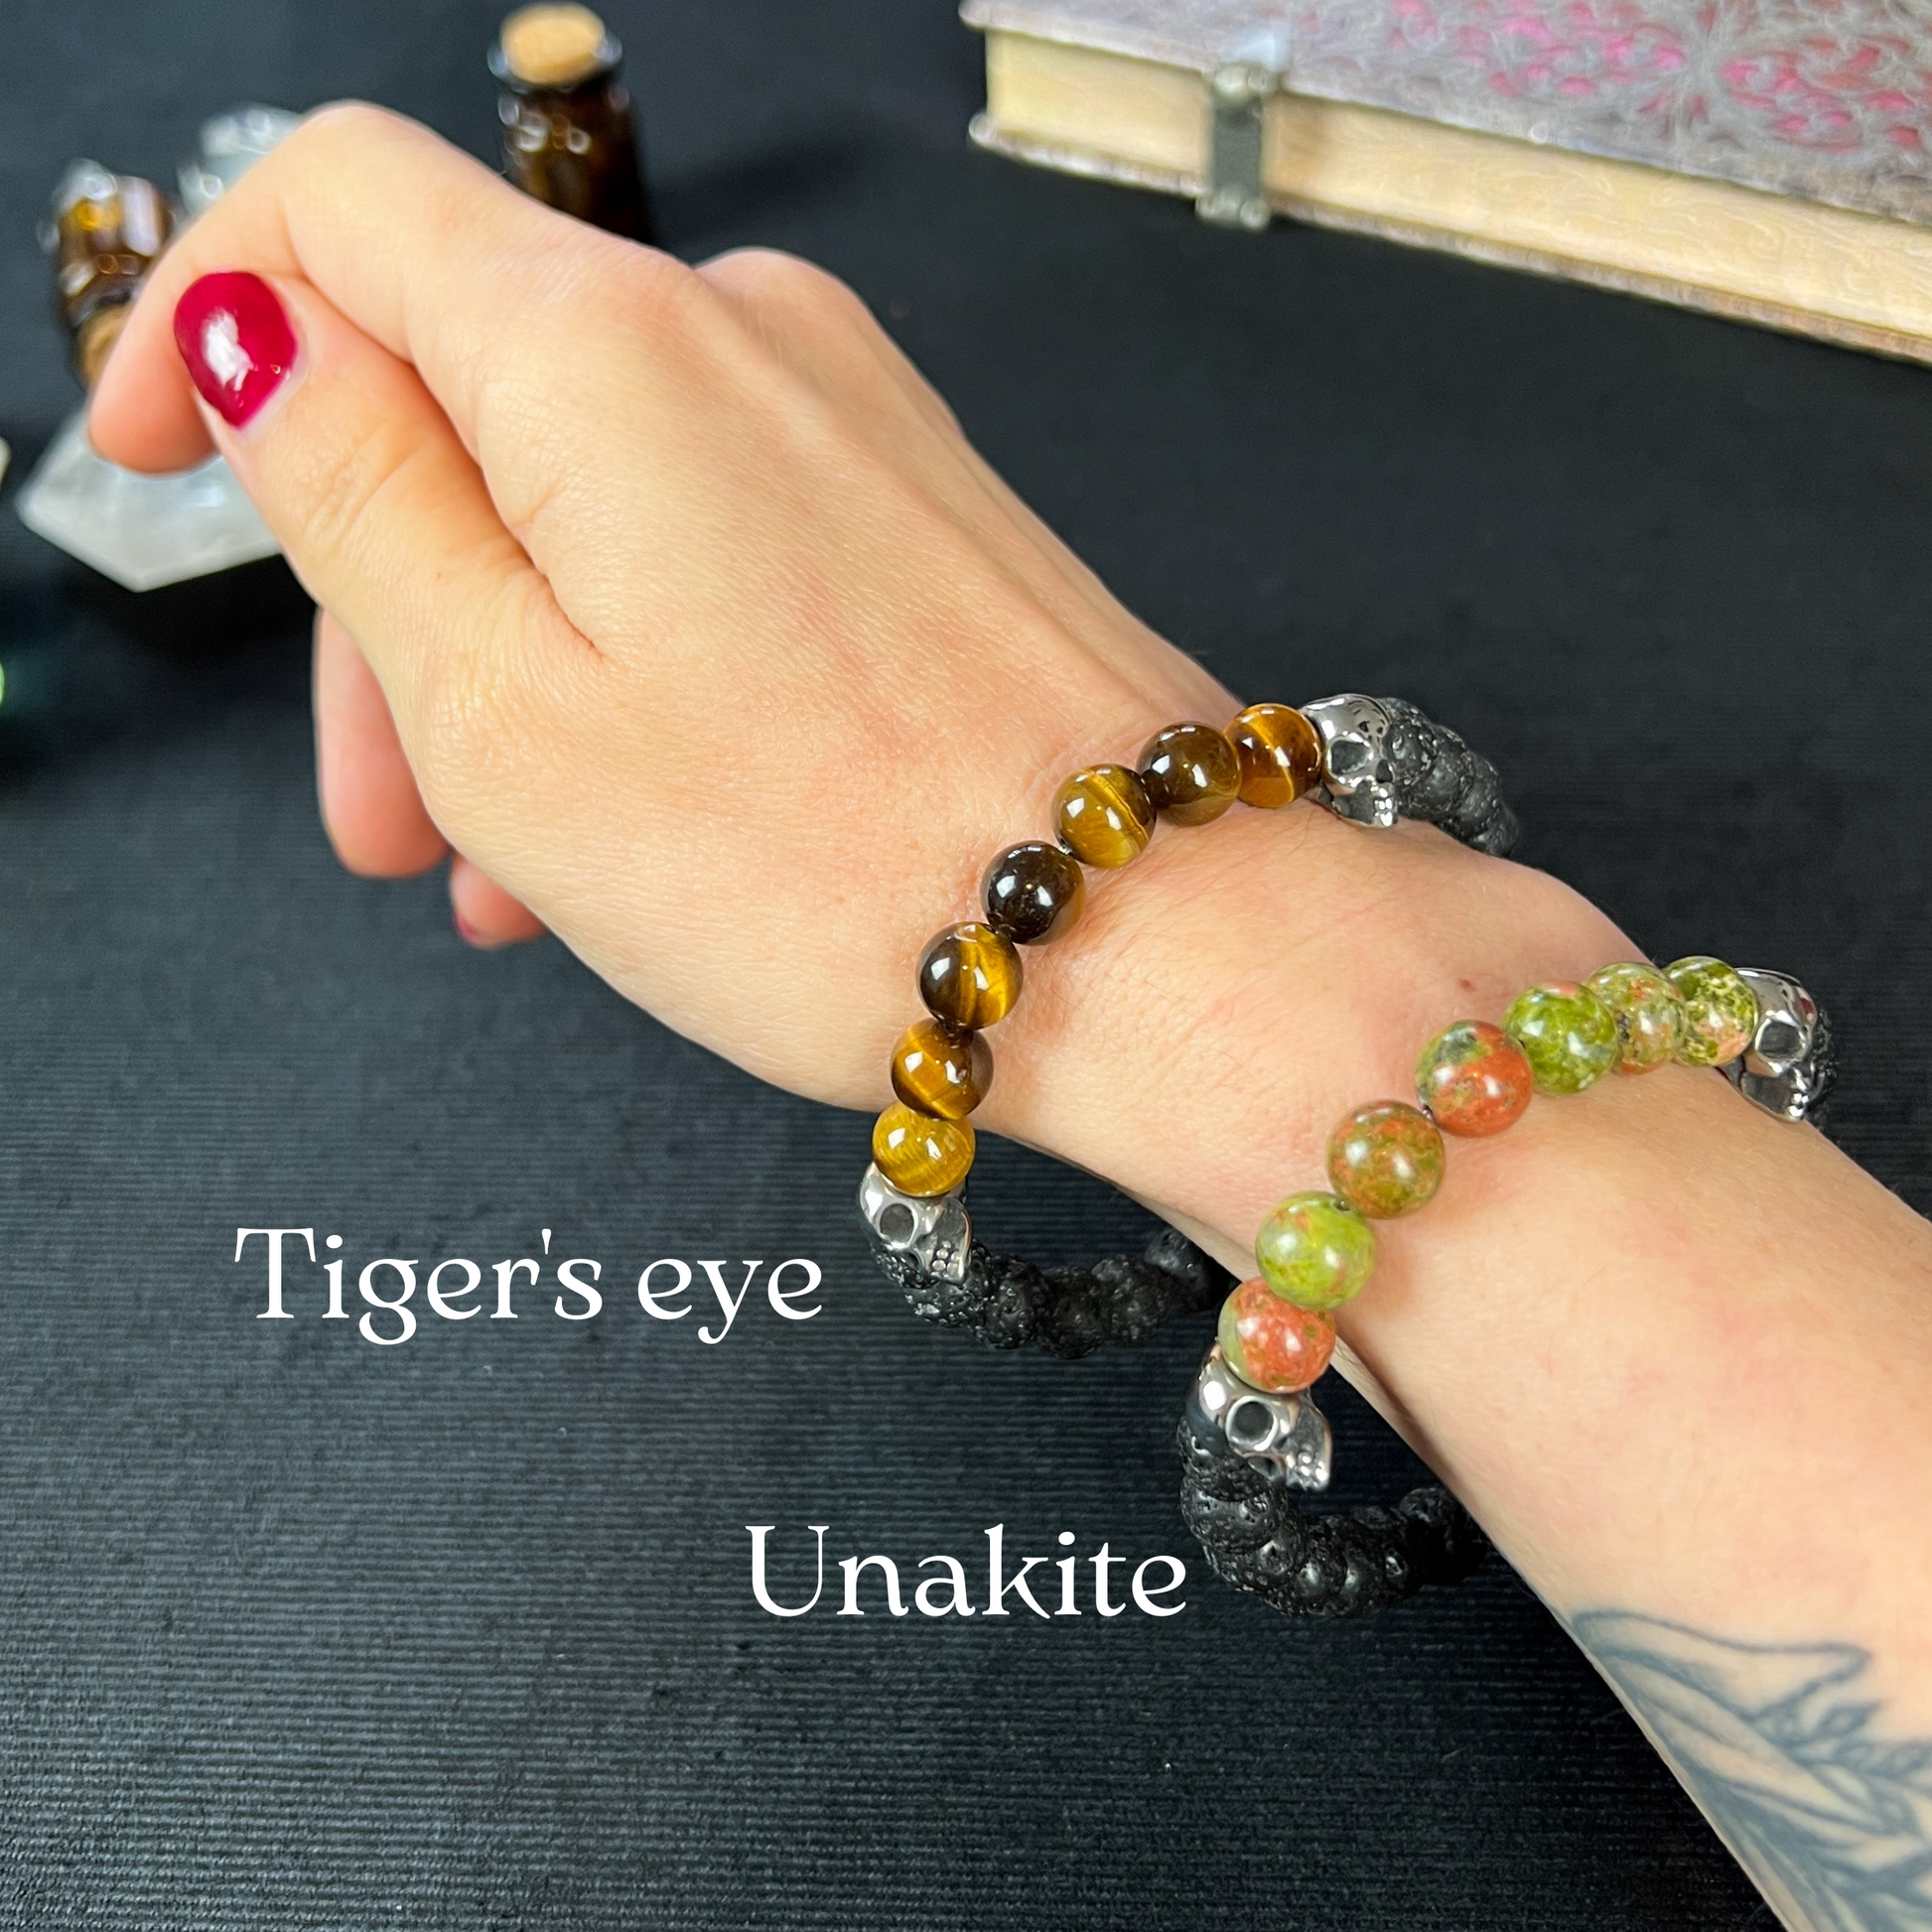 Lava rock and unakite or tiger's eye mala bracelet, with stainless steel skulls - The French Witch shop